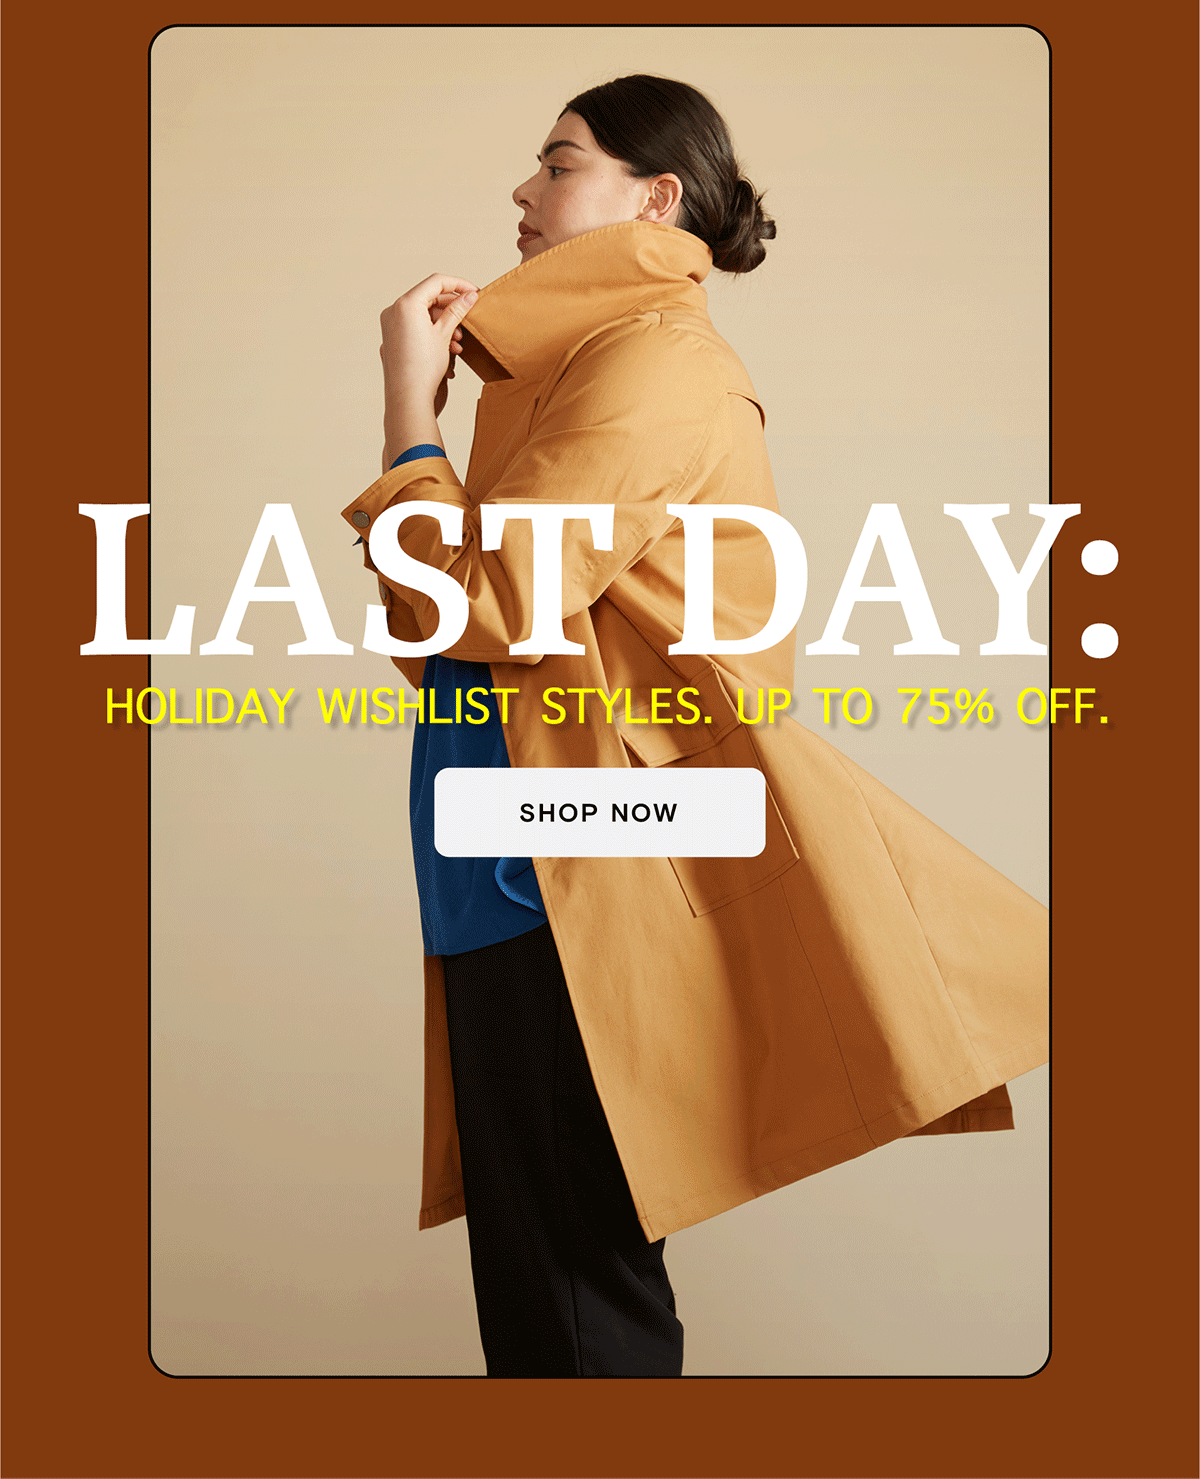 Last day for holiday wishlist styles up to 75% off